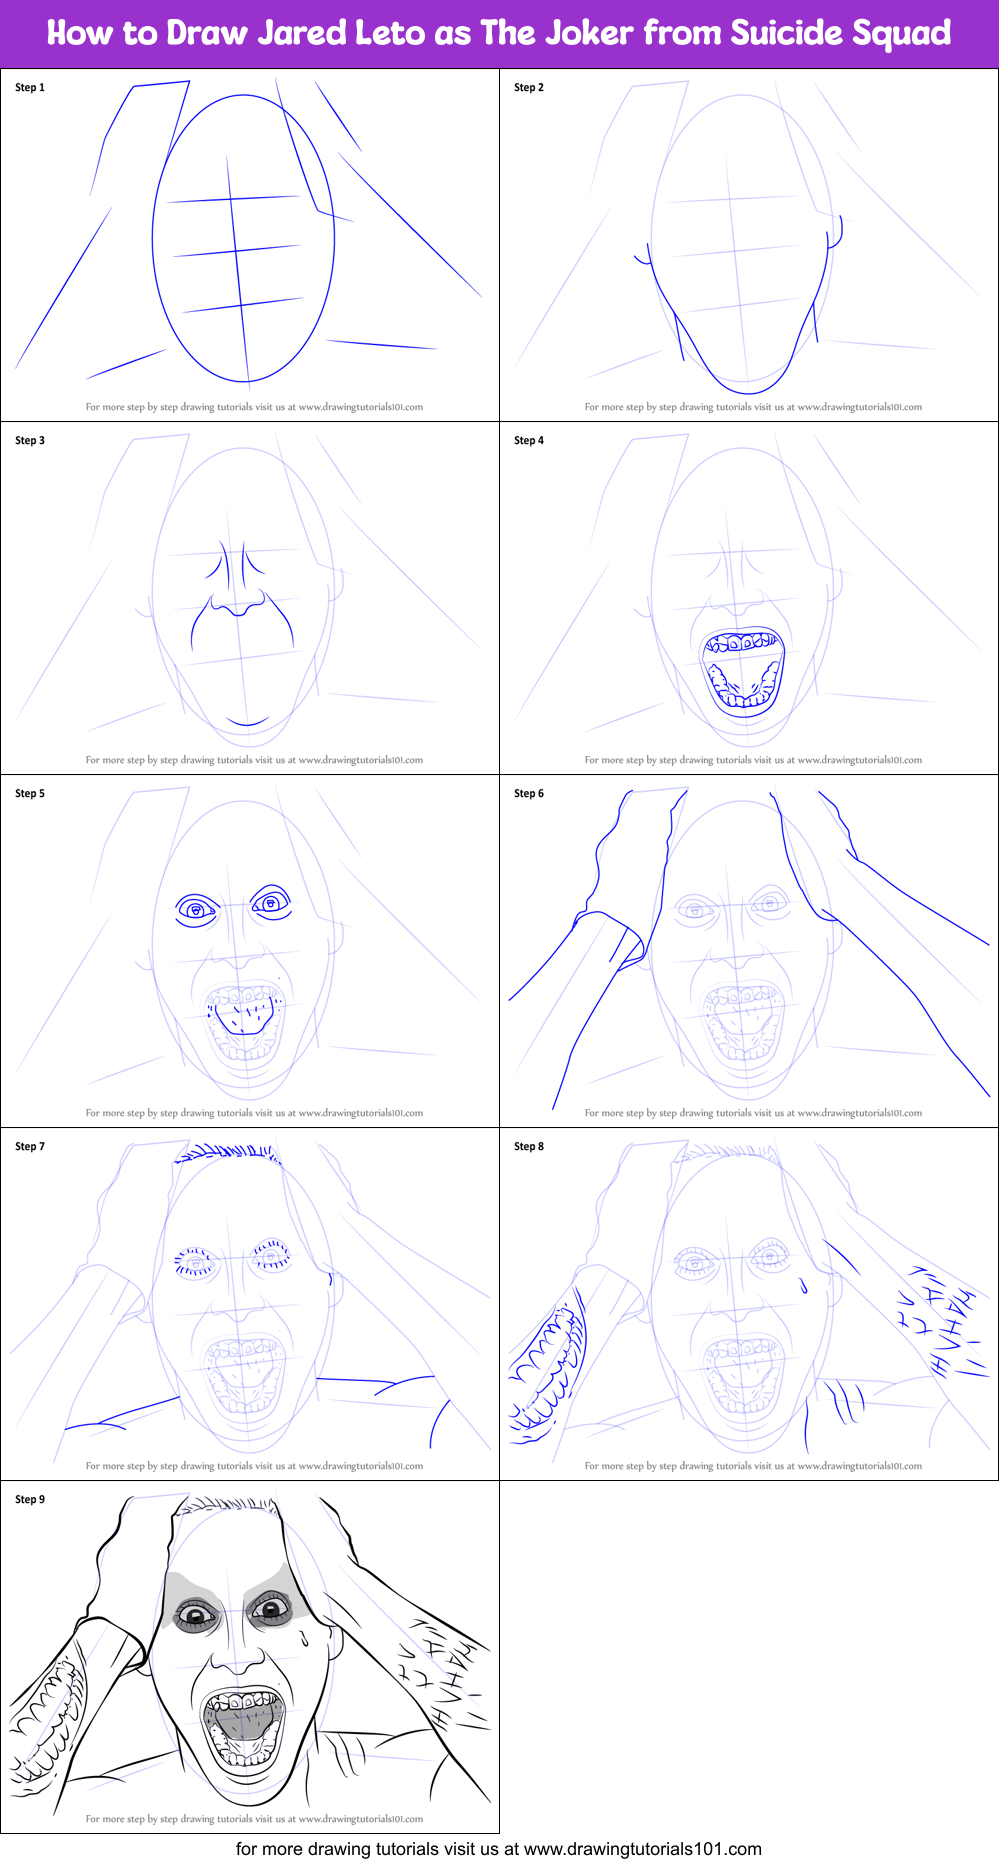 How to Draw Jared Leto as The Joker from Suicide Squad printable step